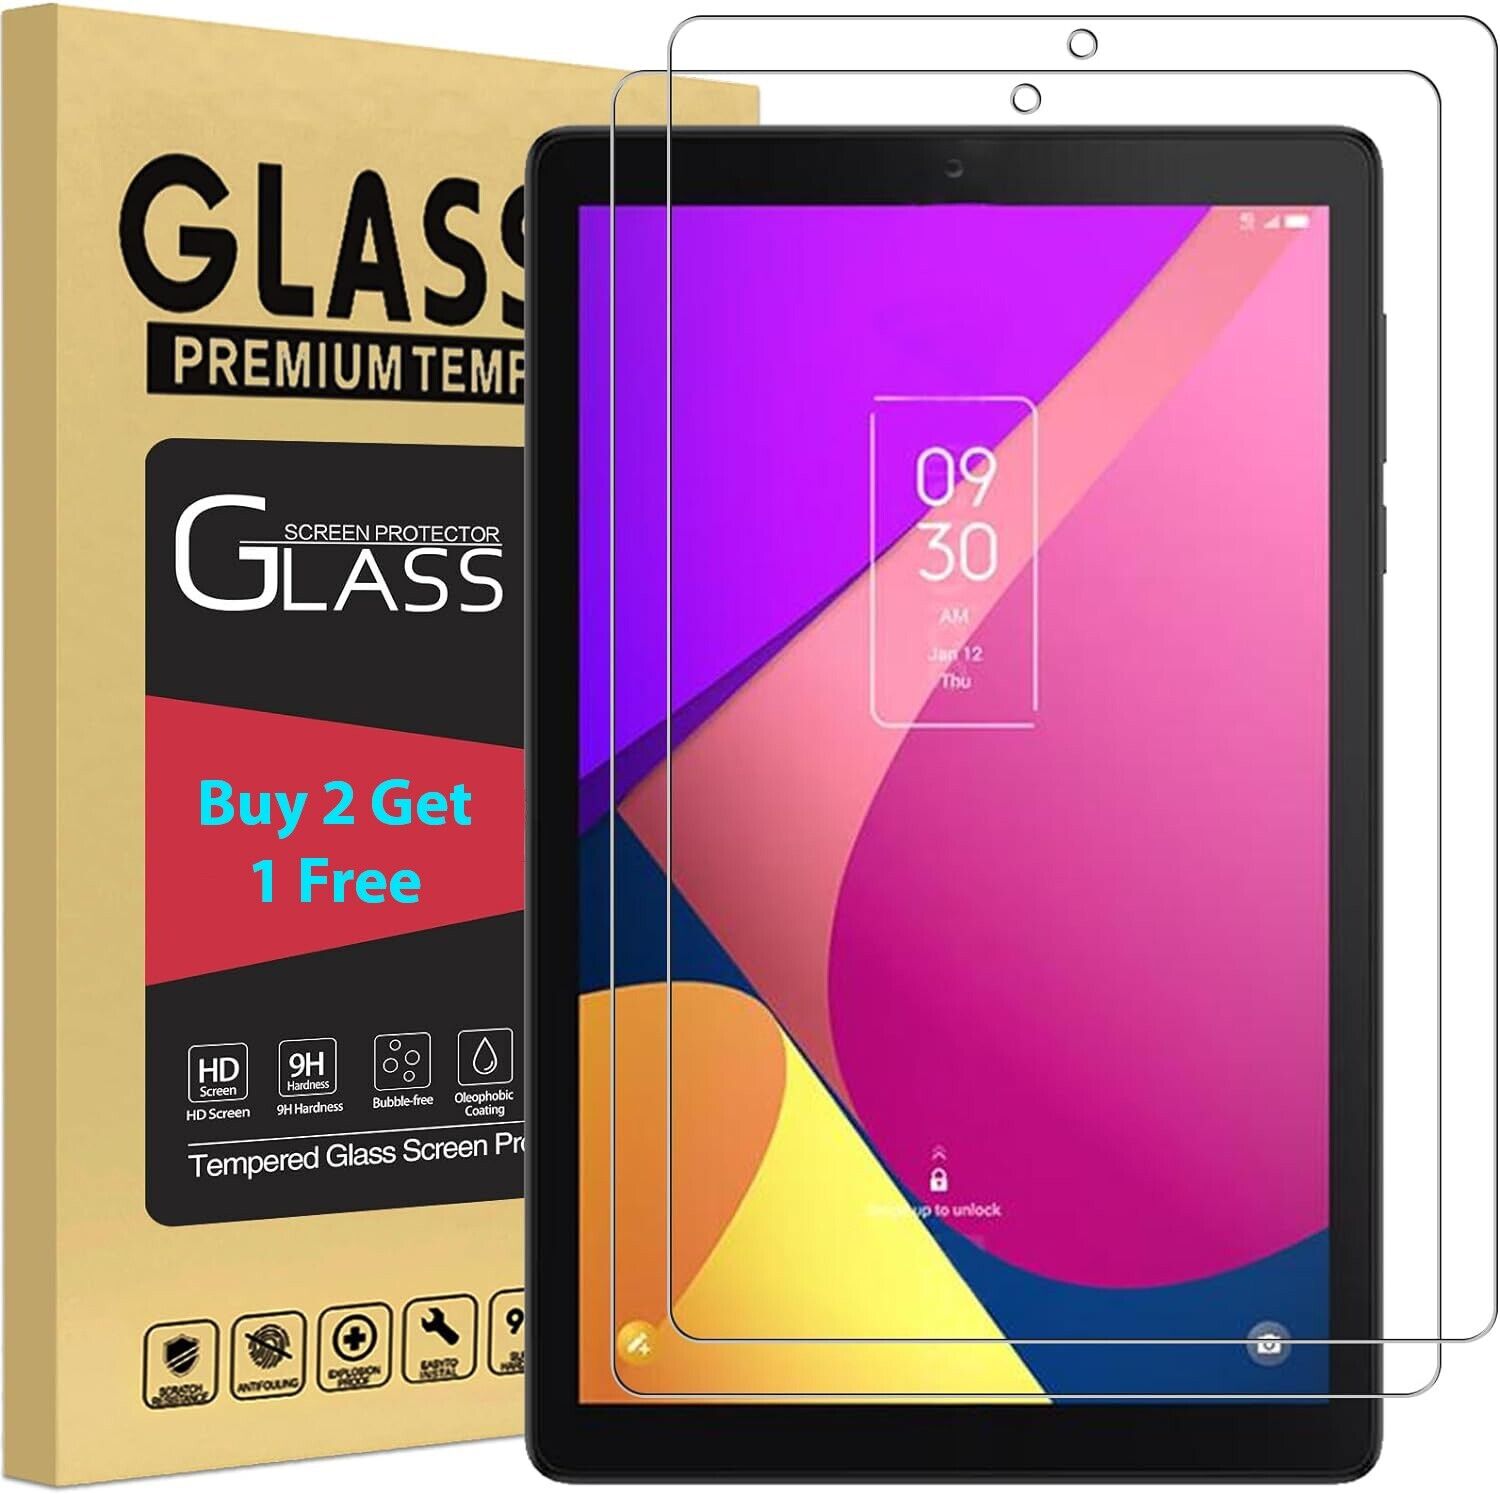 Tempered Glass Screen Protector For TCL TAB 8 inch / TCL TAB 8 LE Tablet